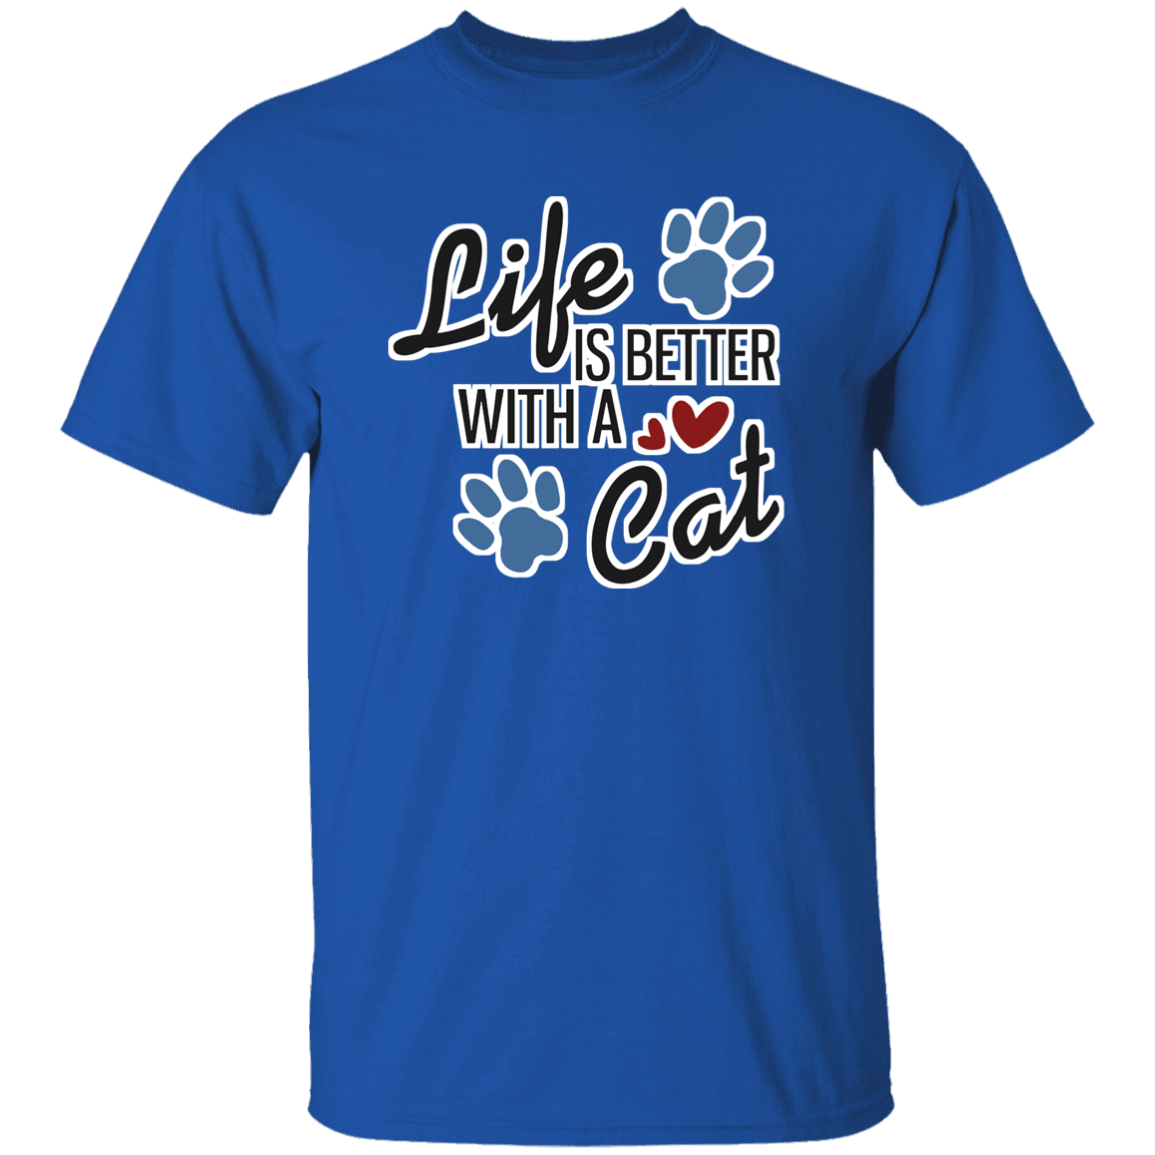 Life is Better with a Cat - Youth T-Shirt.